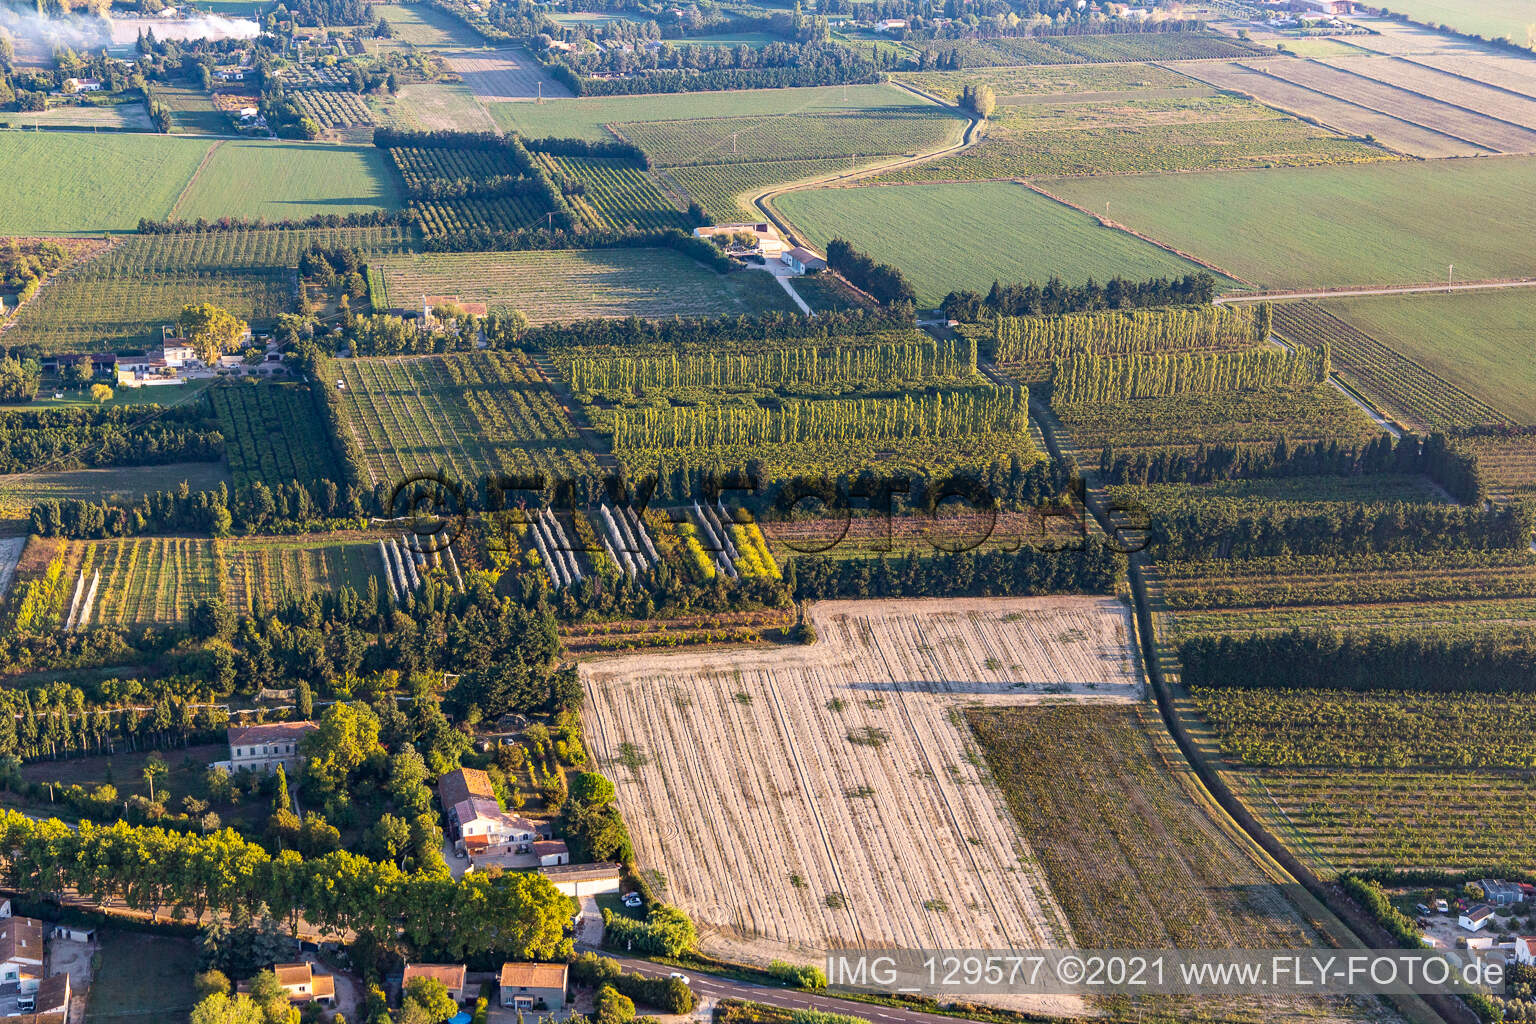 Wind-protected plantations in Tarascon in the state Bouches du Rhone, France